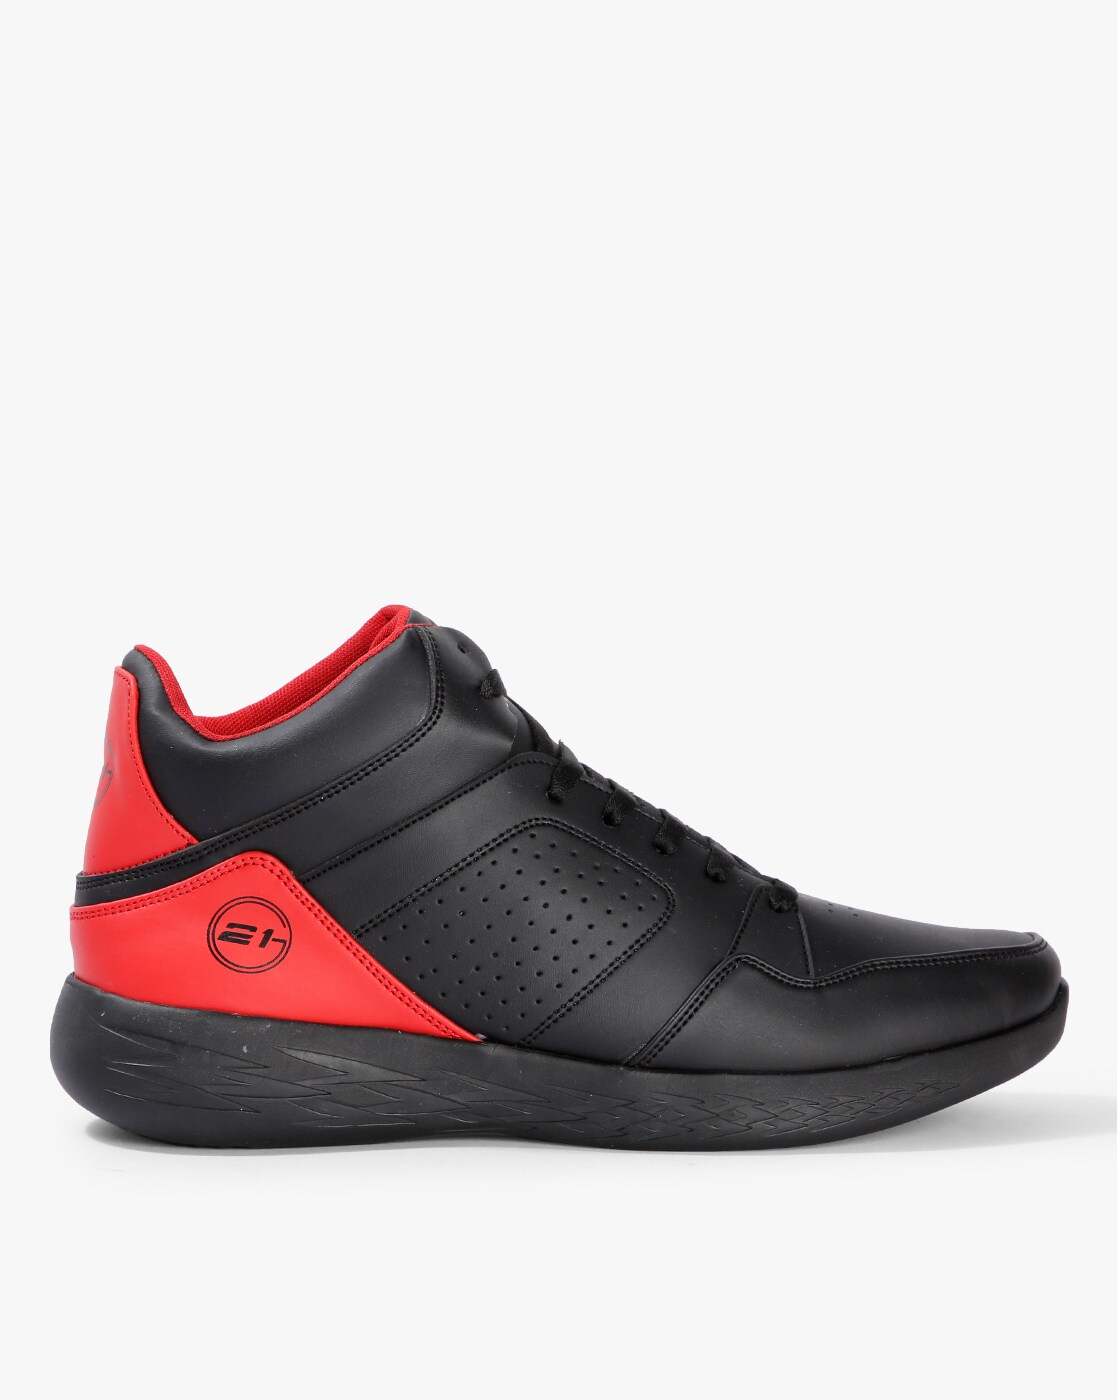 black and red casual shoes